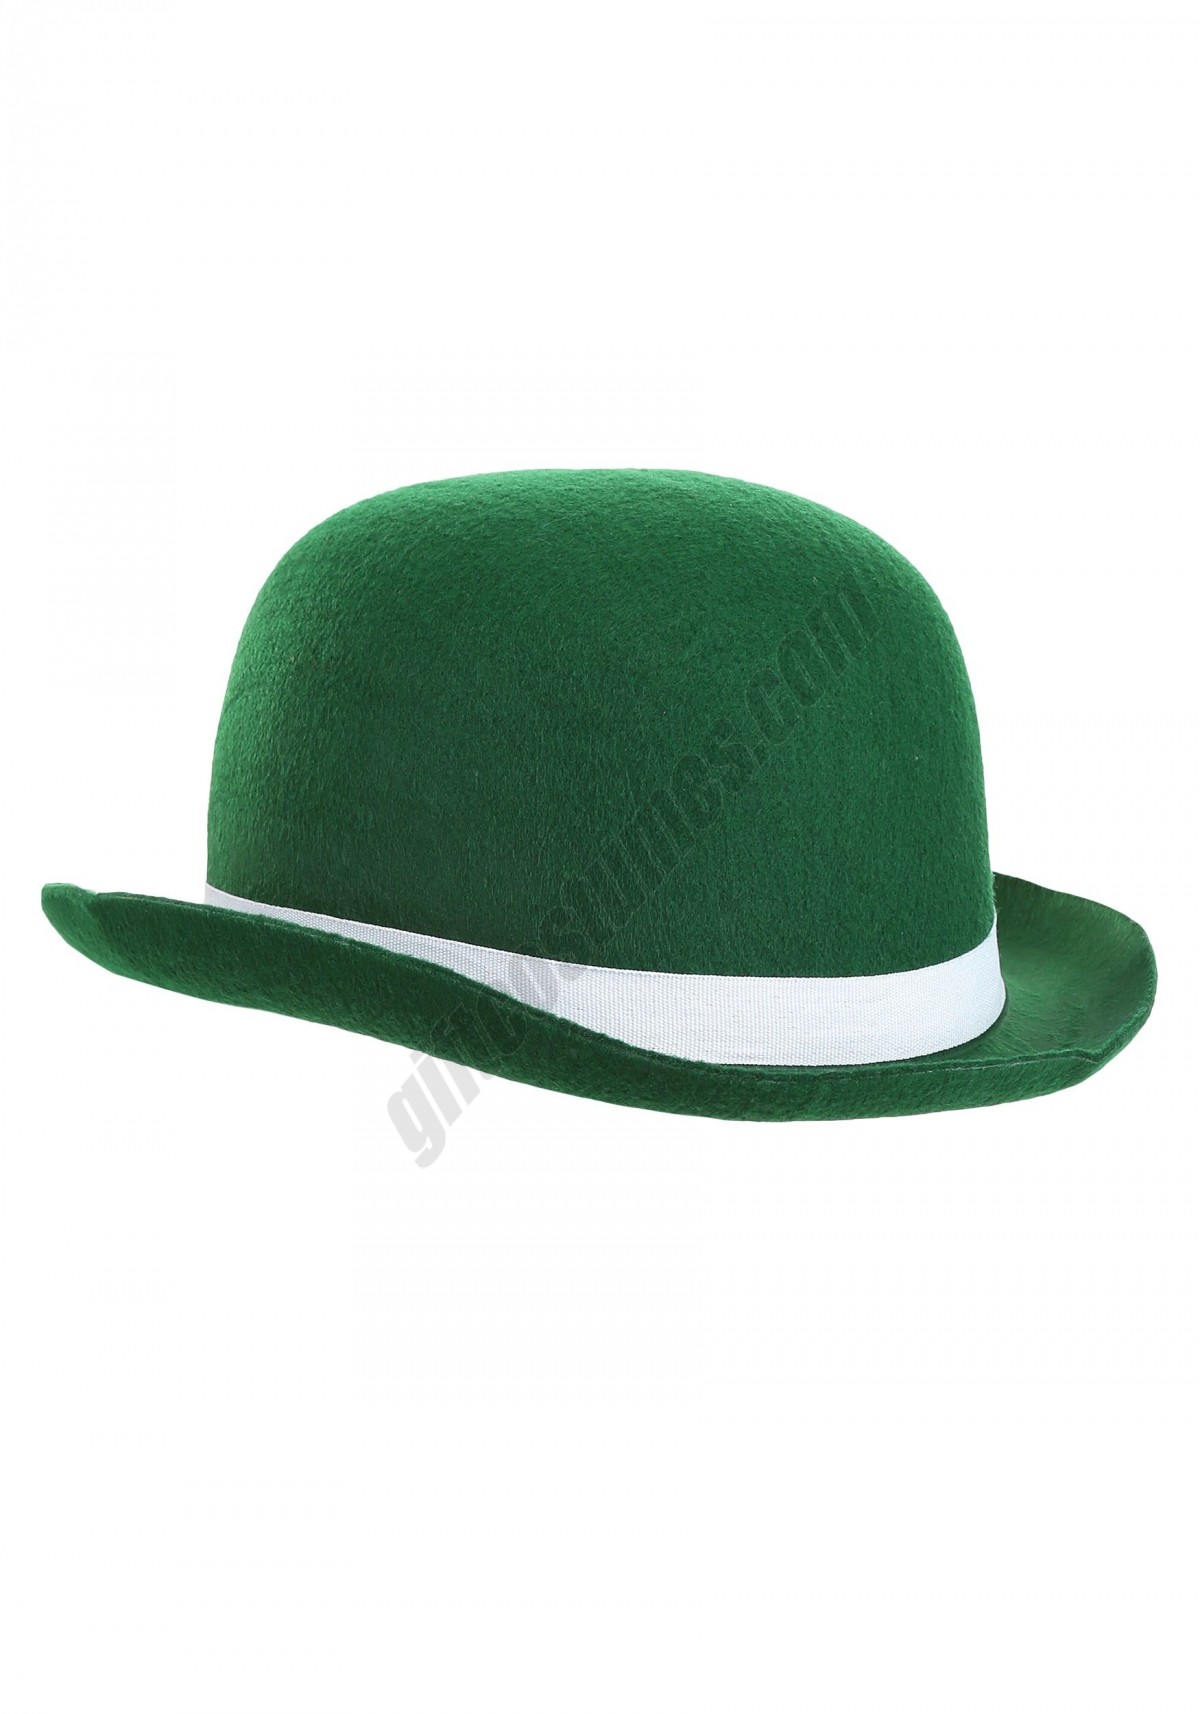 Adult Green Derby Hat Promotions - -3